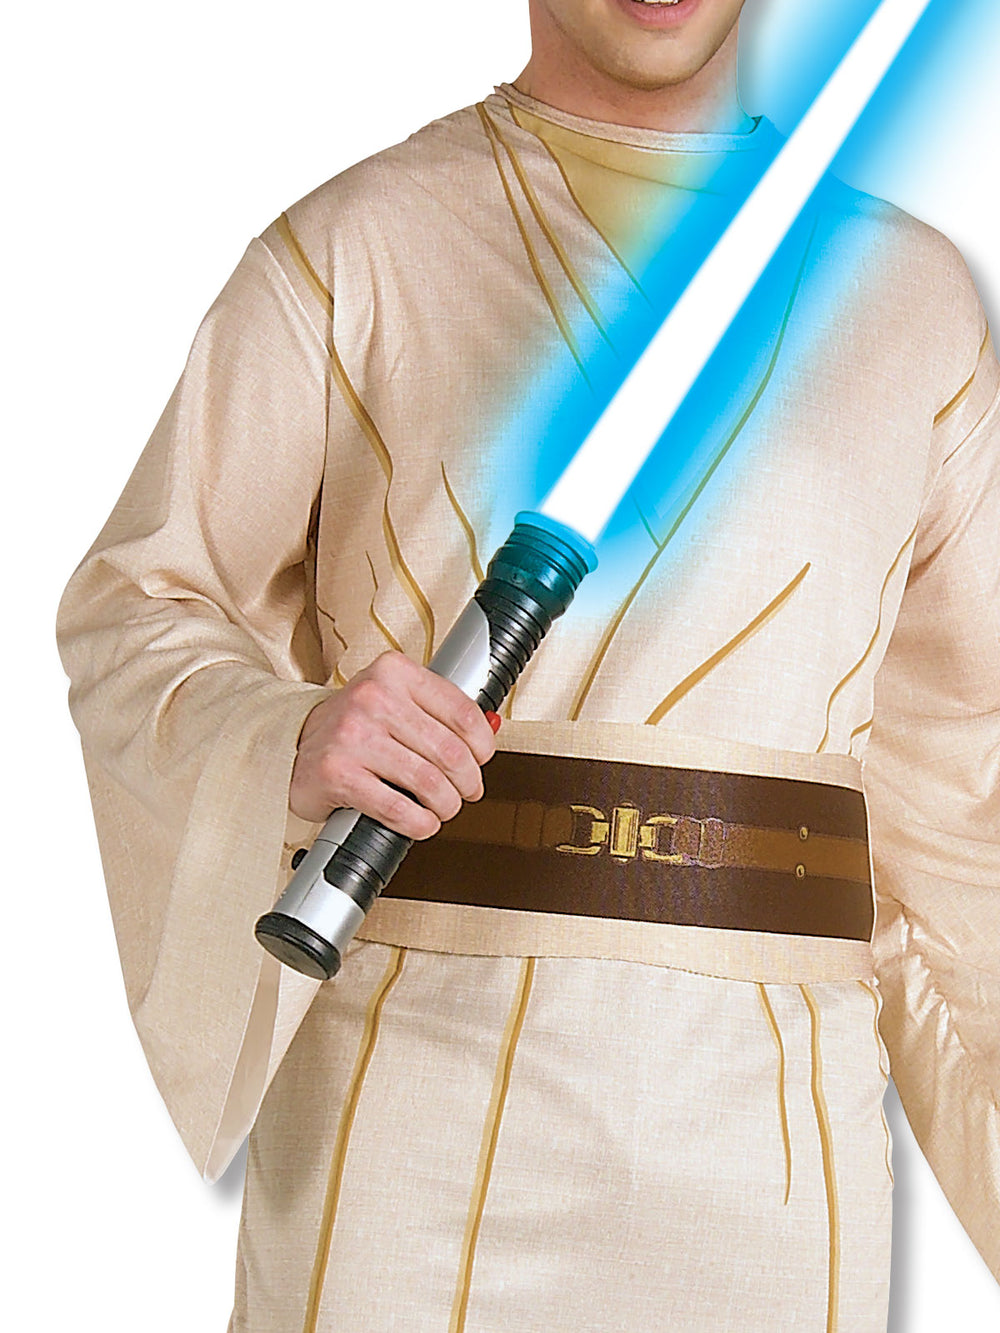 JEDI KNIGHT COSTUME, ADULT - Little Shop of Horrors